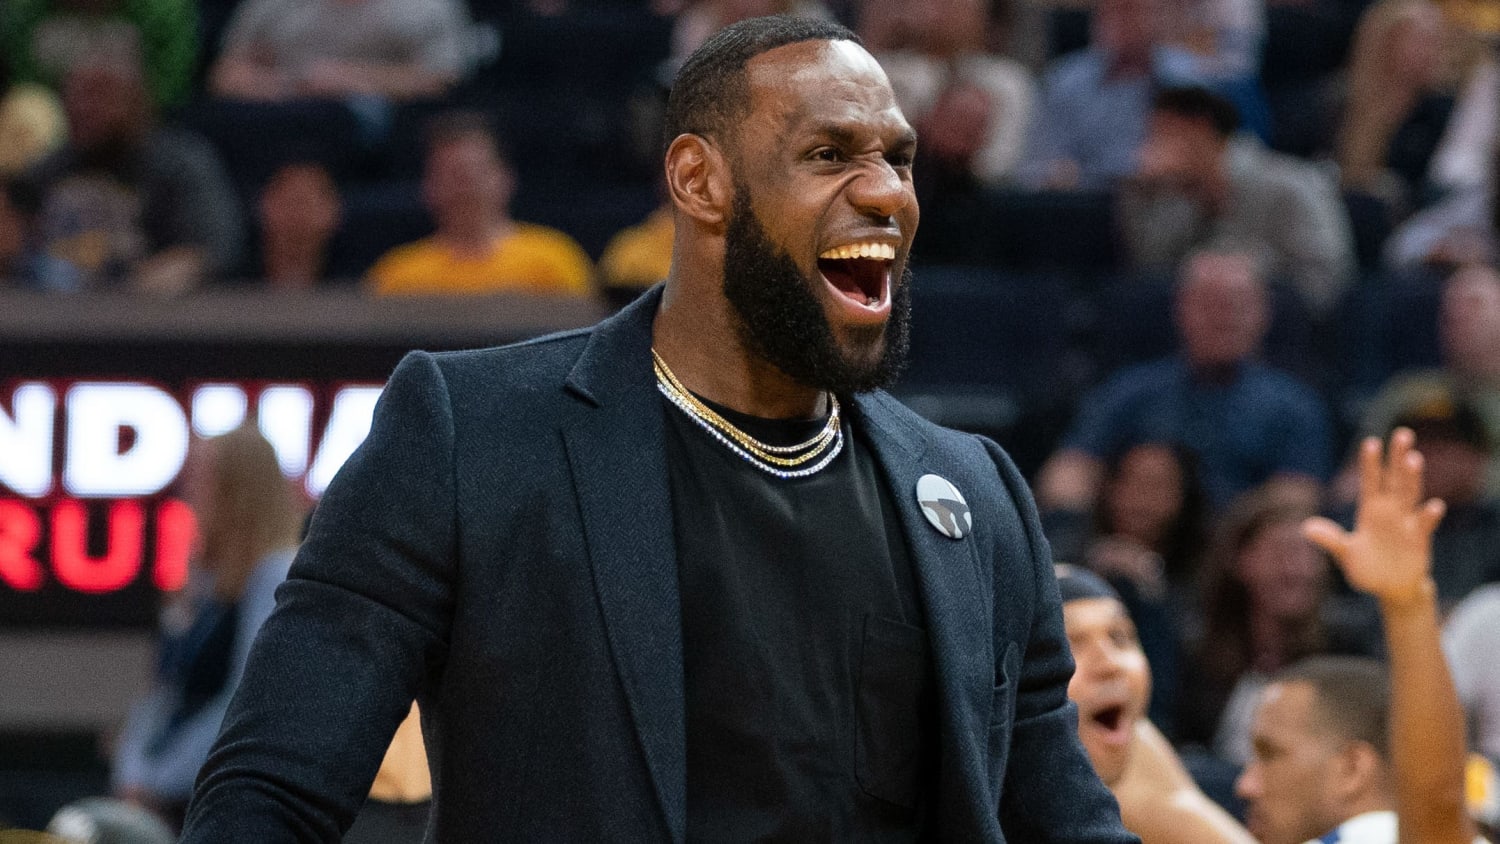 LeBron James calls out Fox News host Laura Ingraham for defending Drew Brees: 'Tired of this treatment'